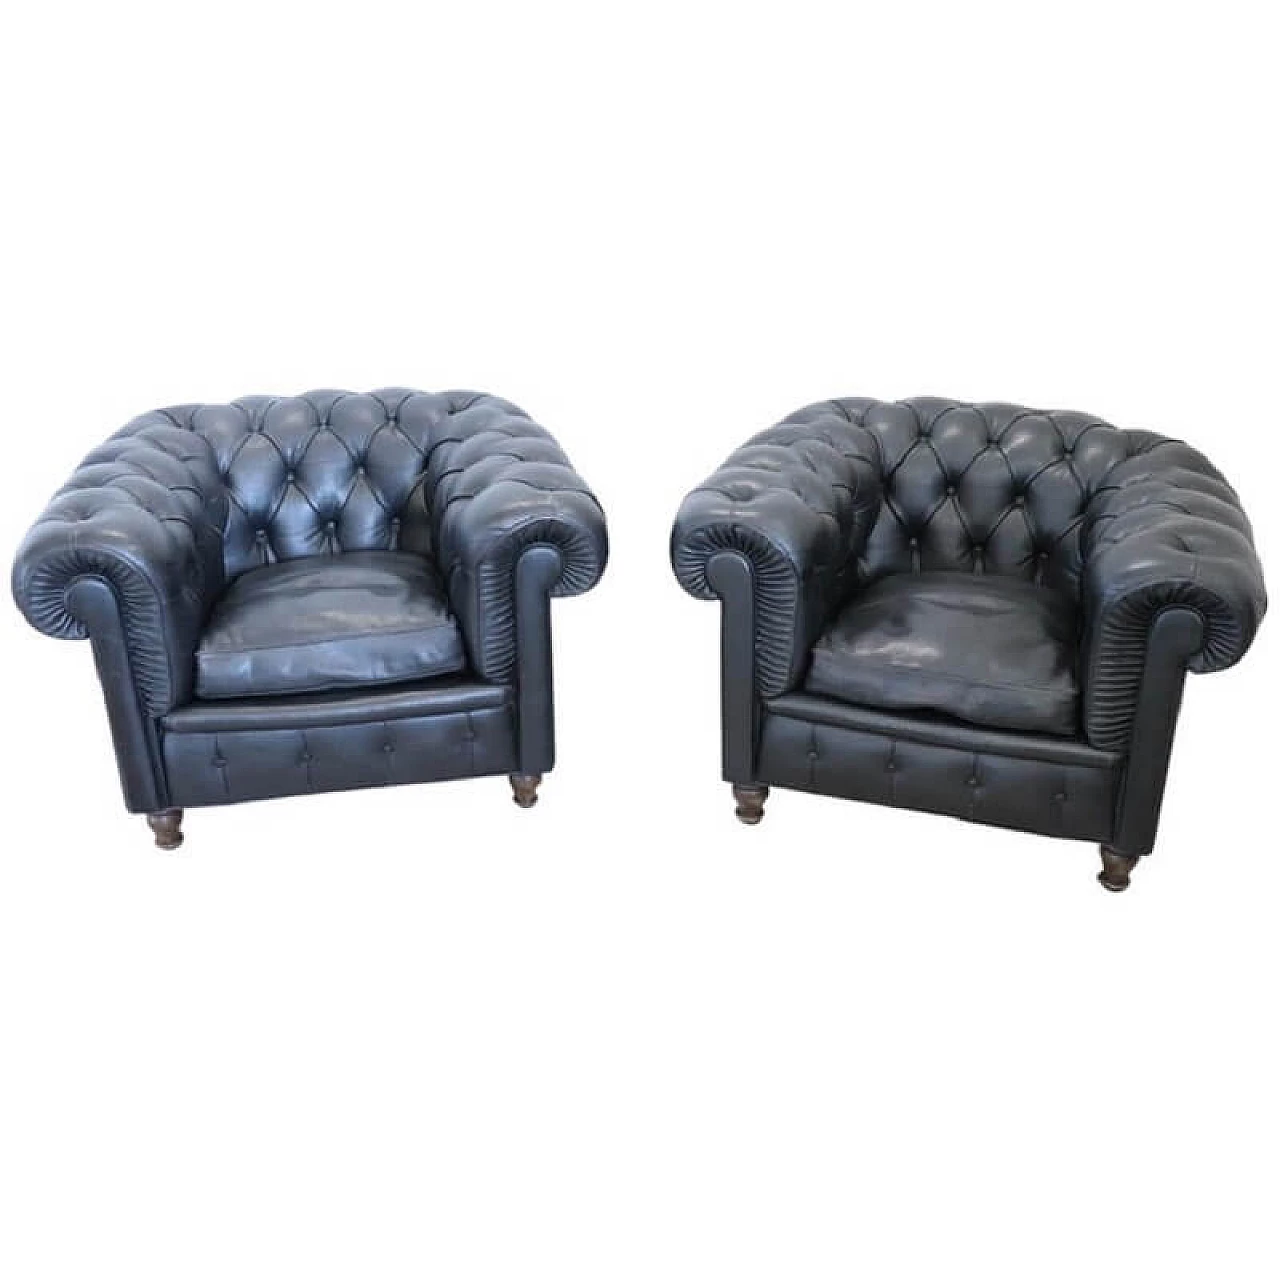 Pair of Chesterfield armchairs by Renzo Frau for Poltrona Frau, 1960s 1068473